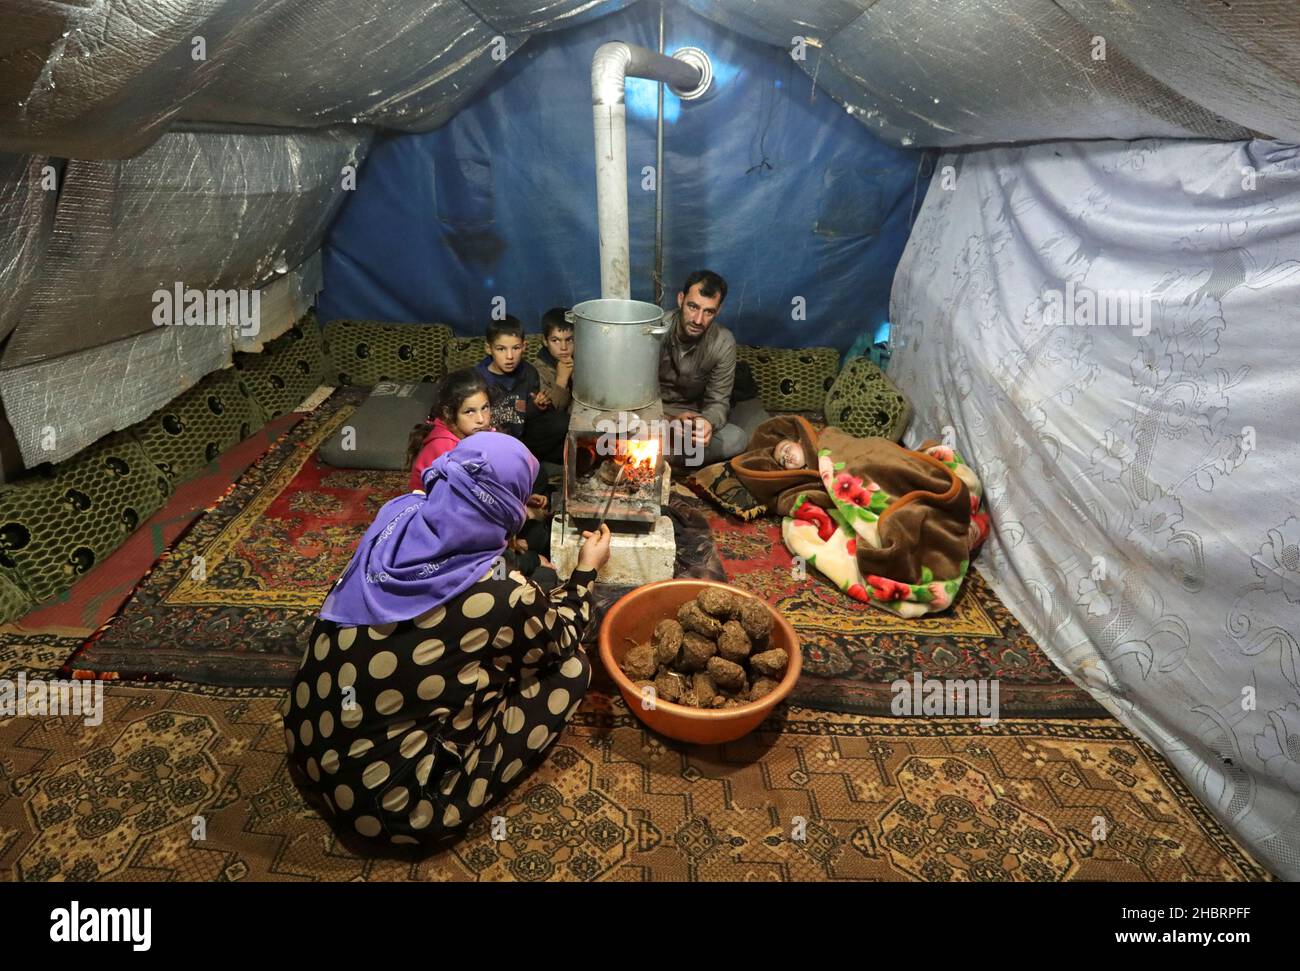 Khaled Muhammad al-Hamadin, a resident of Kafu Arouk camp for internally displaced, sits with his family inside a tent in Idlib, Syria December 20, 2021. Picture taken December 20, 2021. REUTERS/Khalil Ashawi Stock Photo